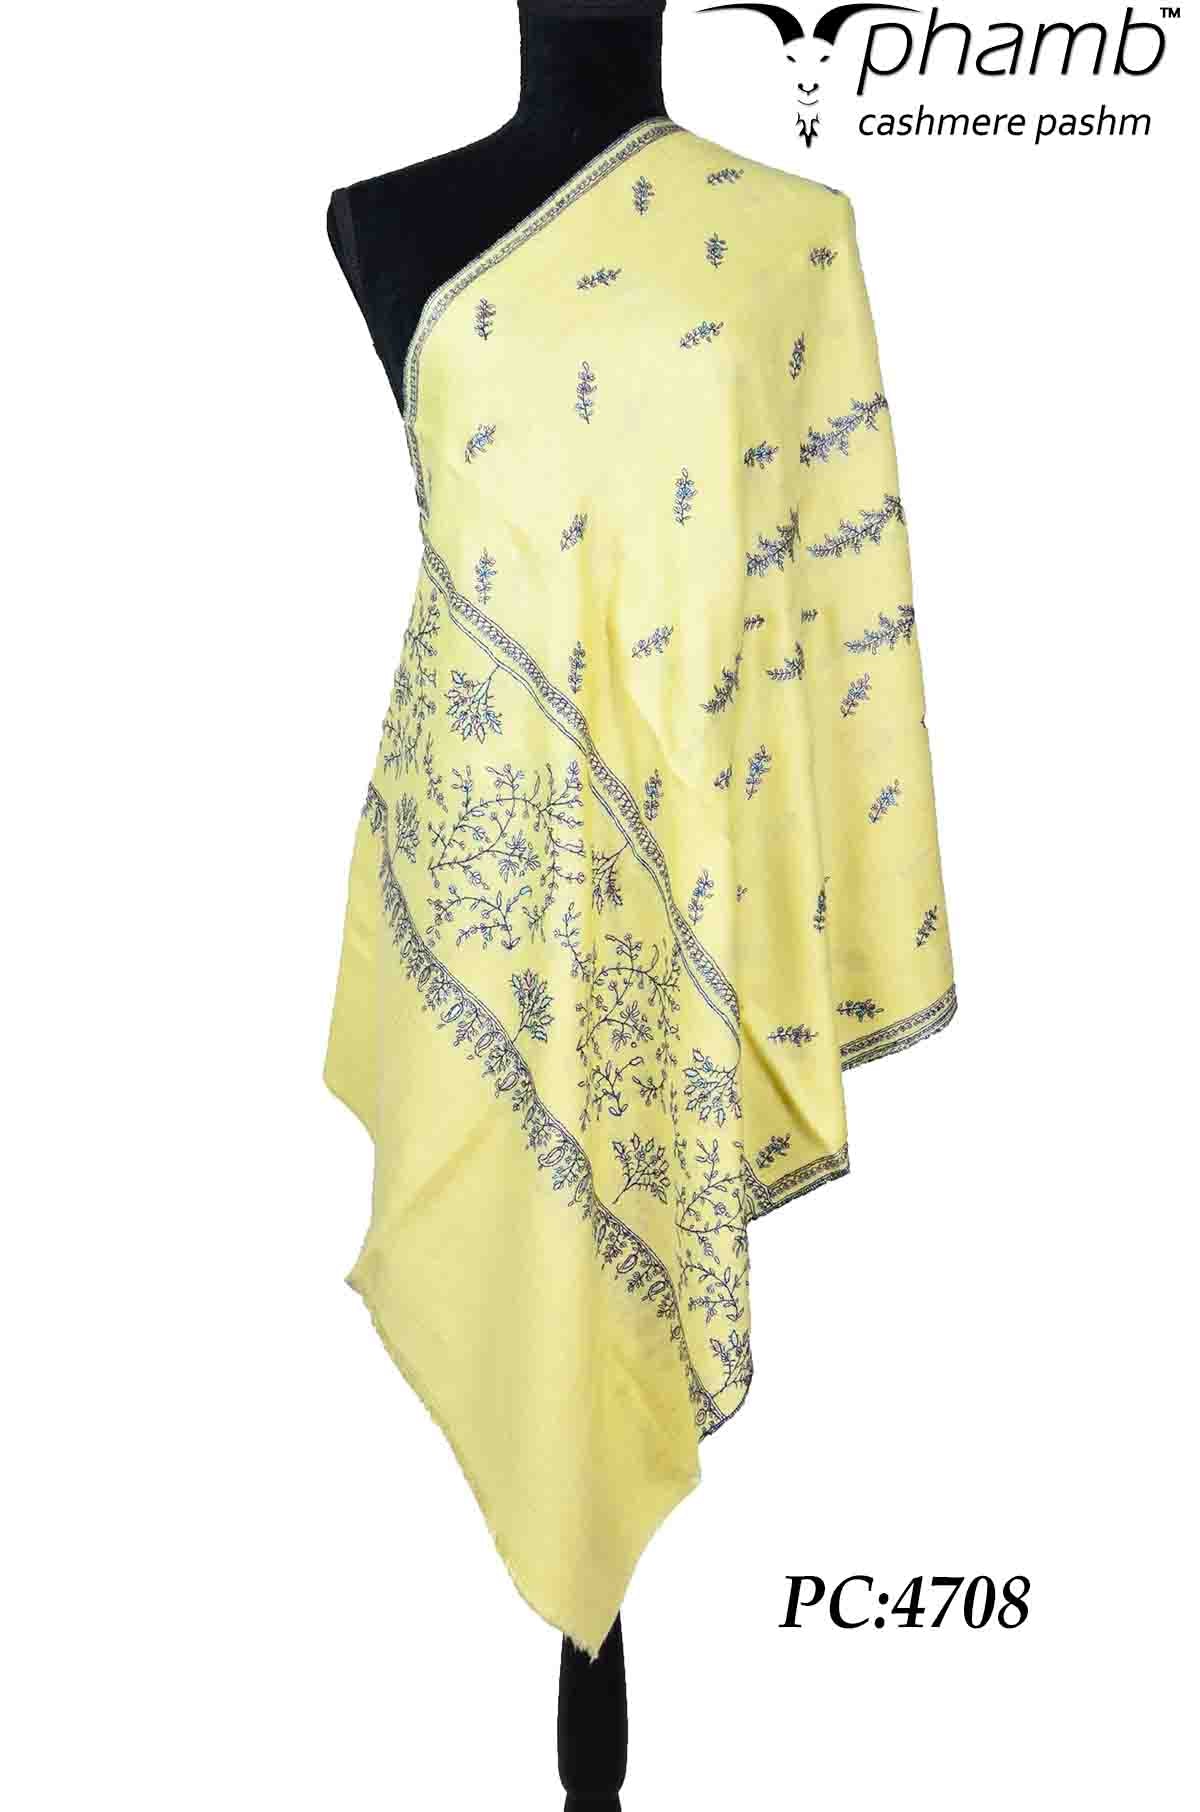 light yellow embroidery stole - 4708